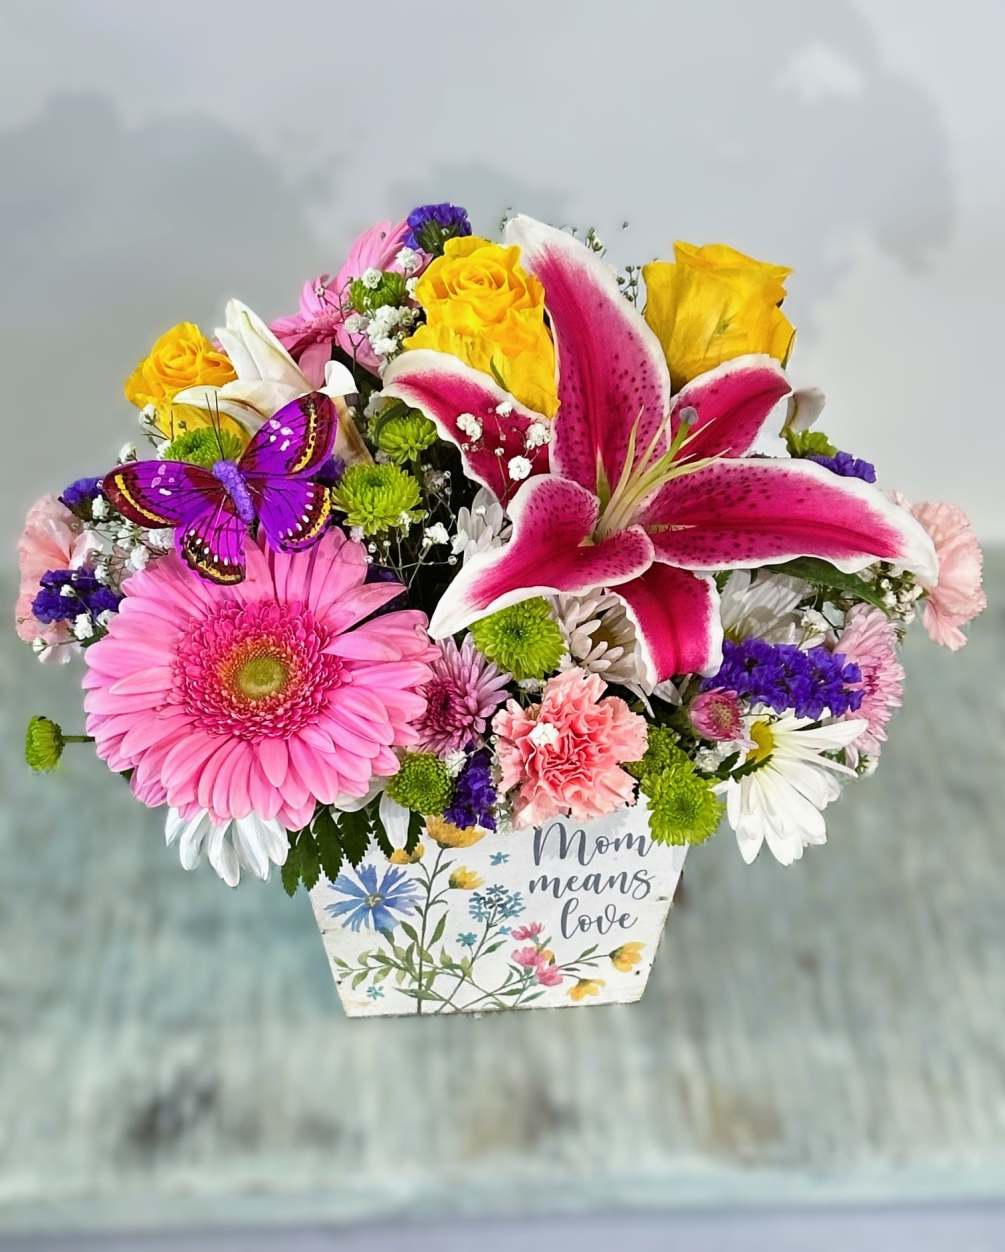 Arrangement designed in a wooden planter with a wildflower design in the